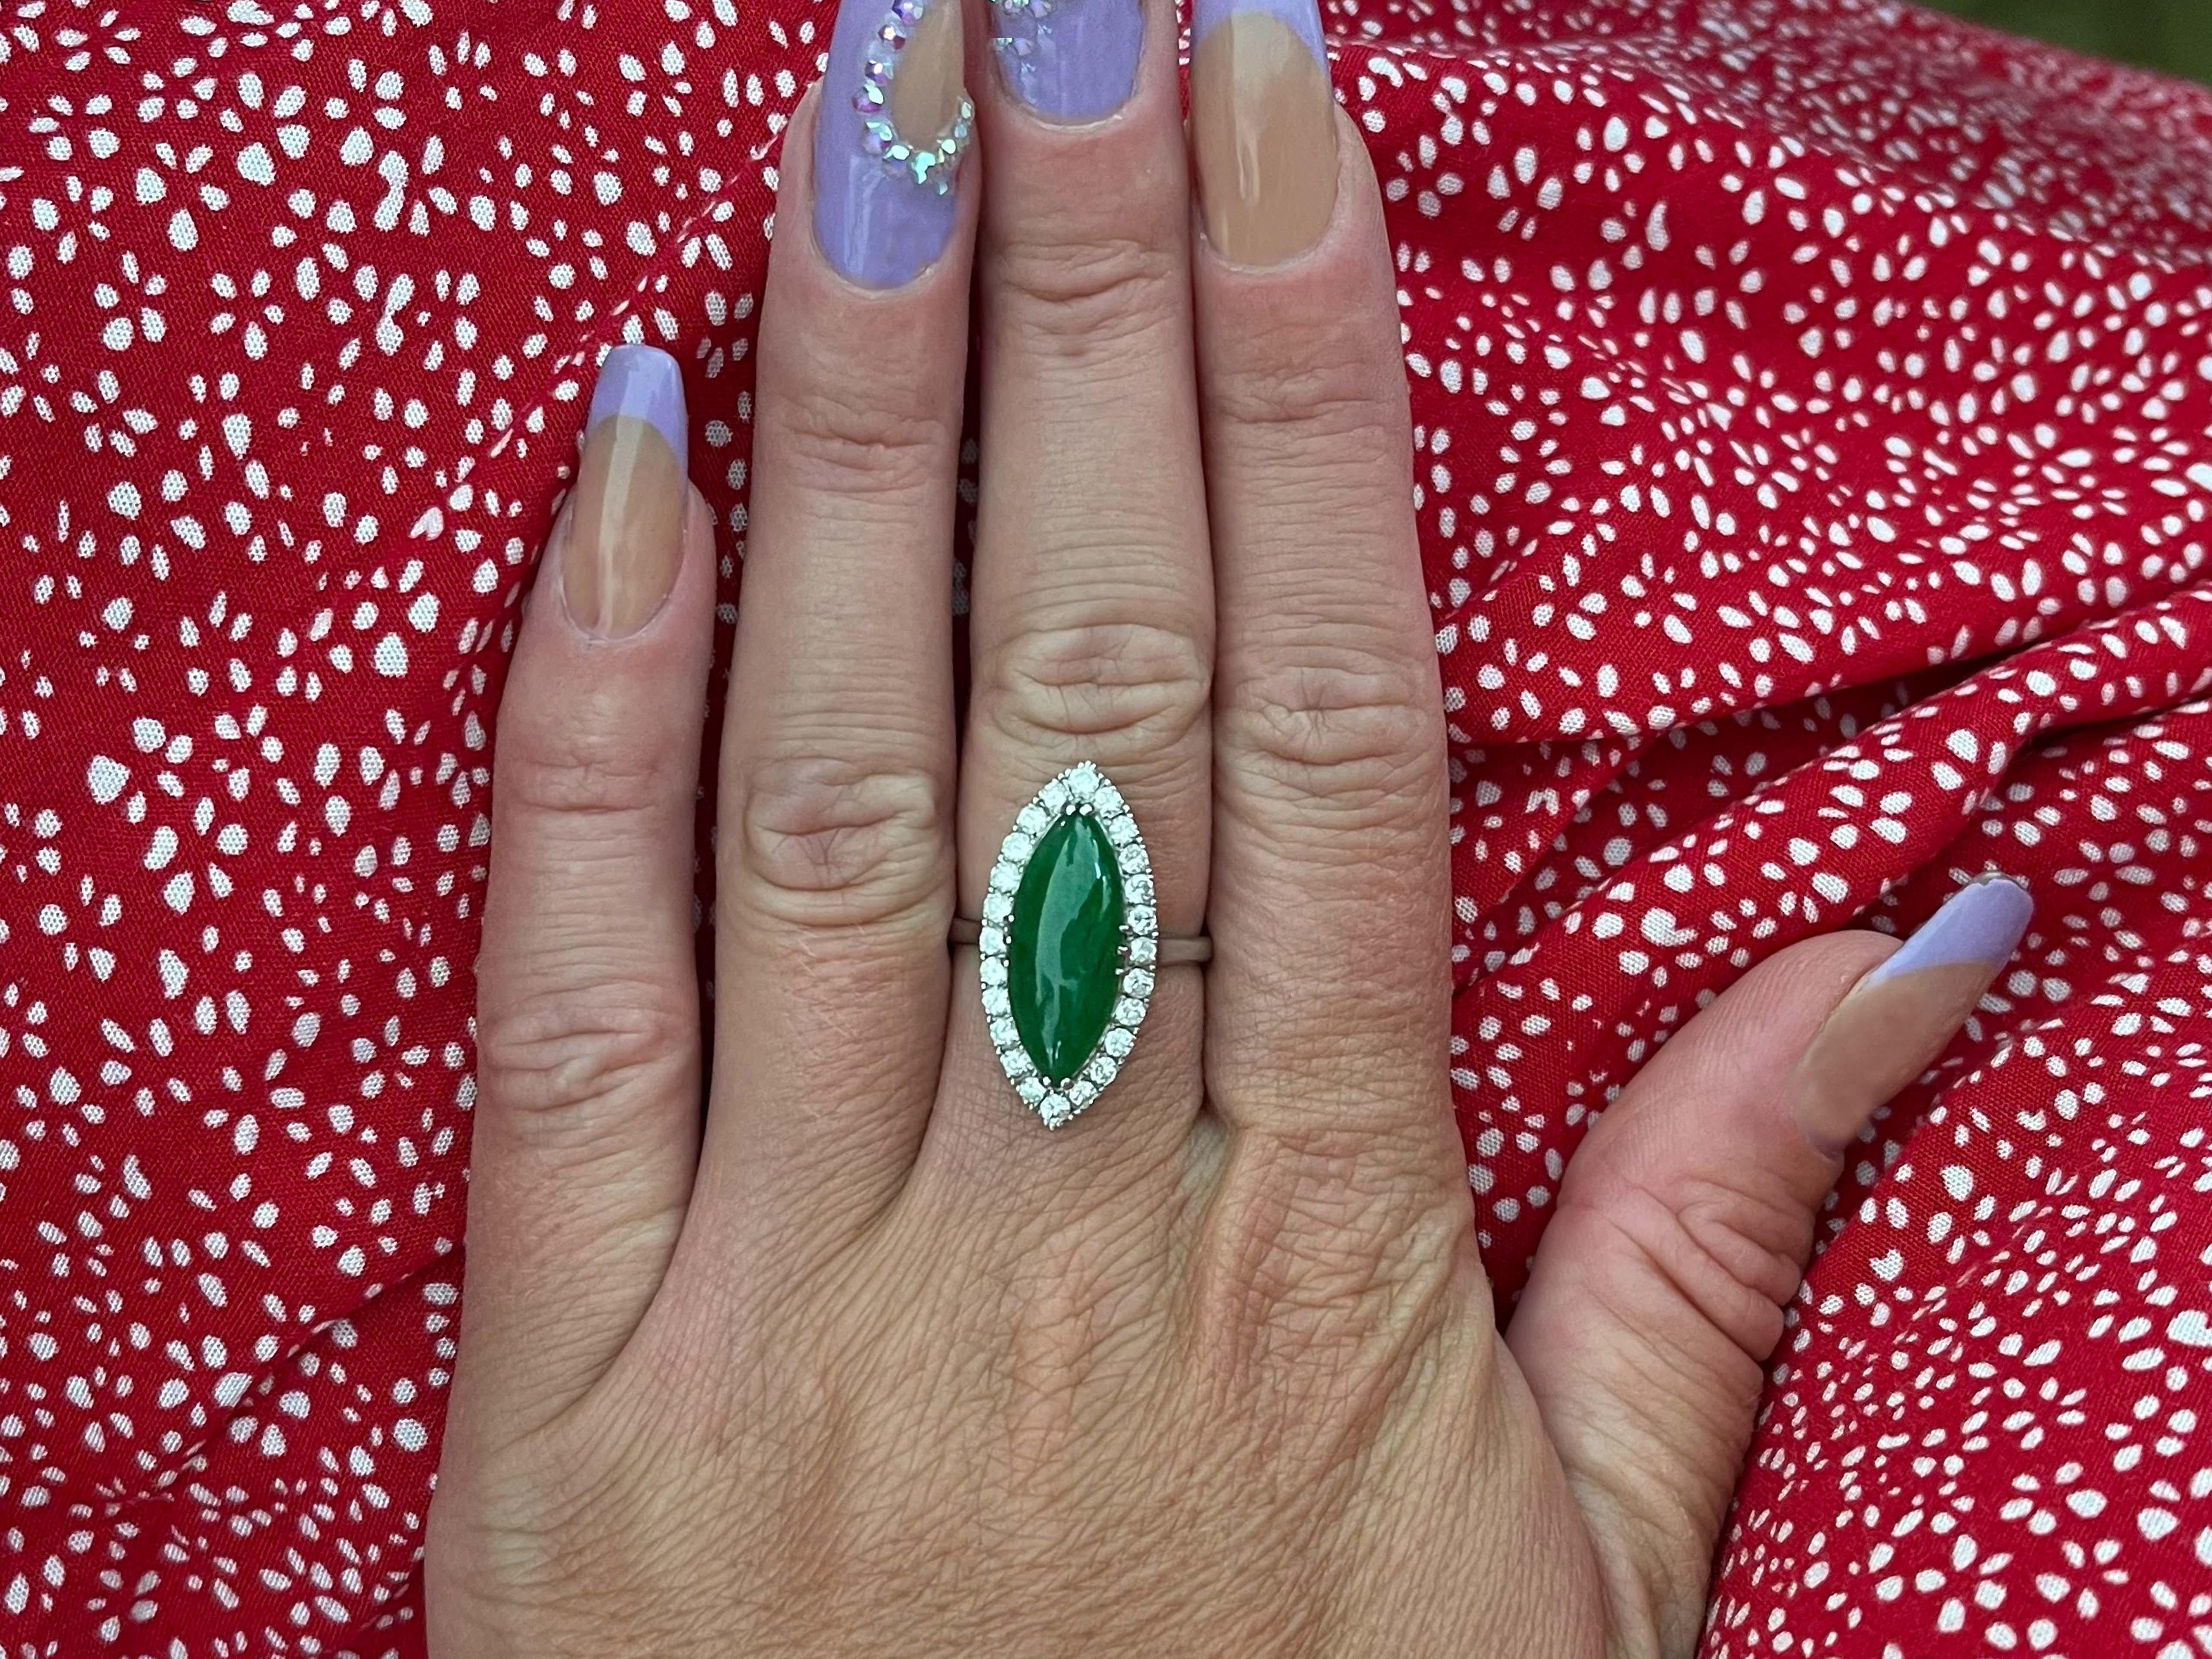 GIA Vintage Marquise Double Cabochon Green Translucent Jadeite Jade and Diamond Ring in Platinum. The ring is set with a gorgeous Marquise shape double cabochon green jadeite jade with a 24 round brilliant diamond halo. The center Jadeite Jade is